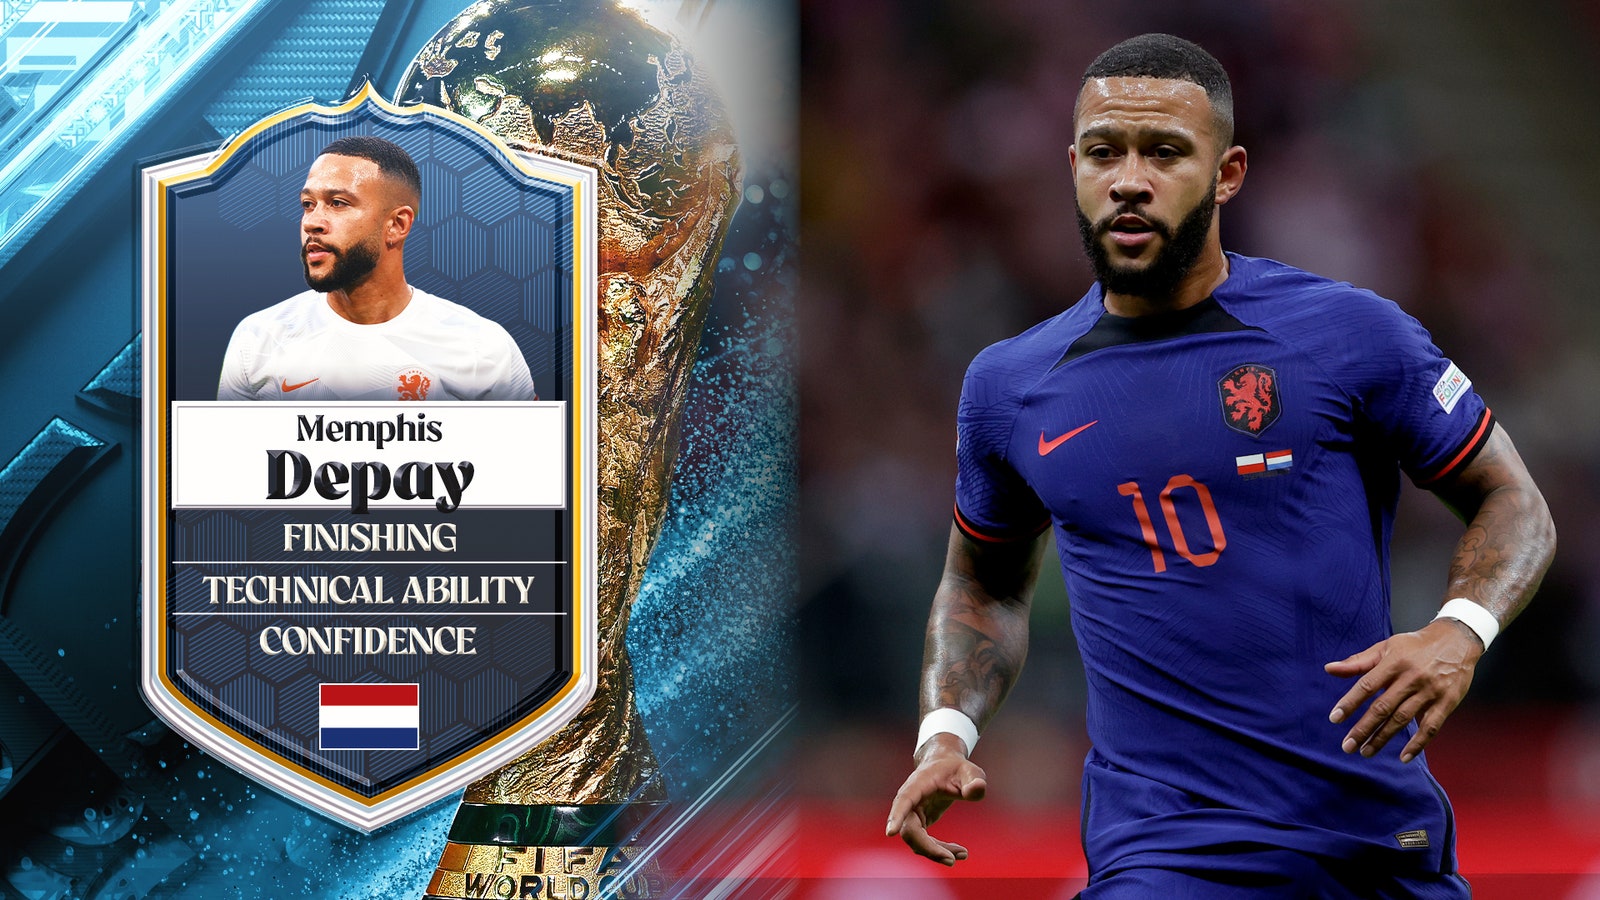 Depay is the star striker of the Netherlands